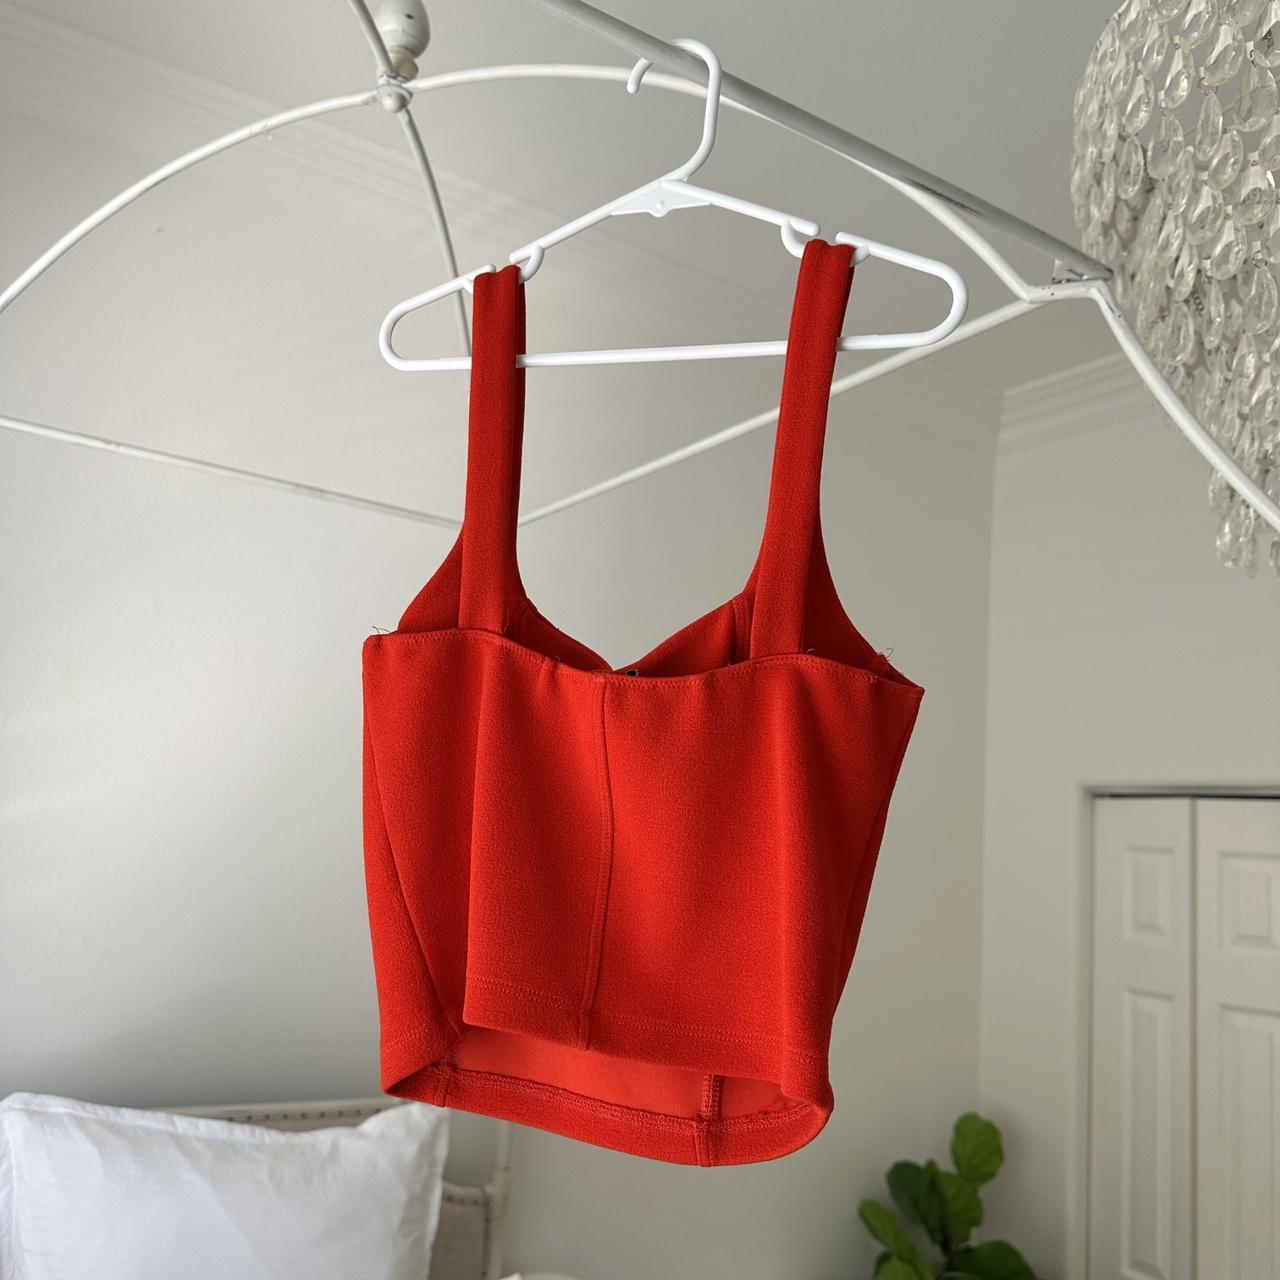 Zara Red Bustier Top , Perfect going out top, its